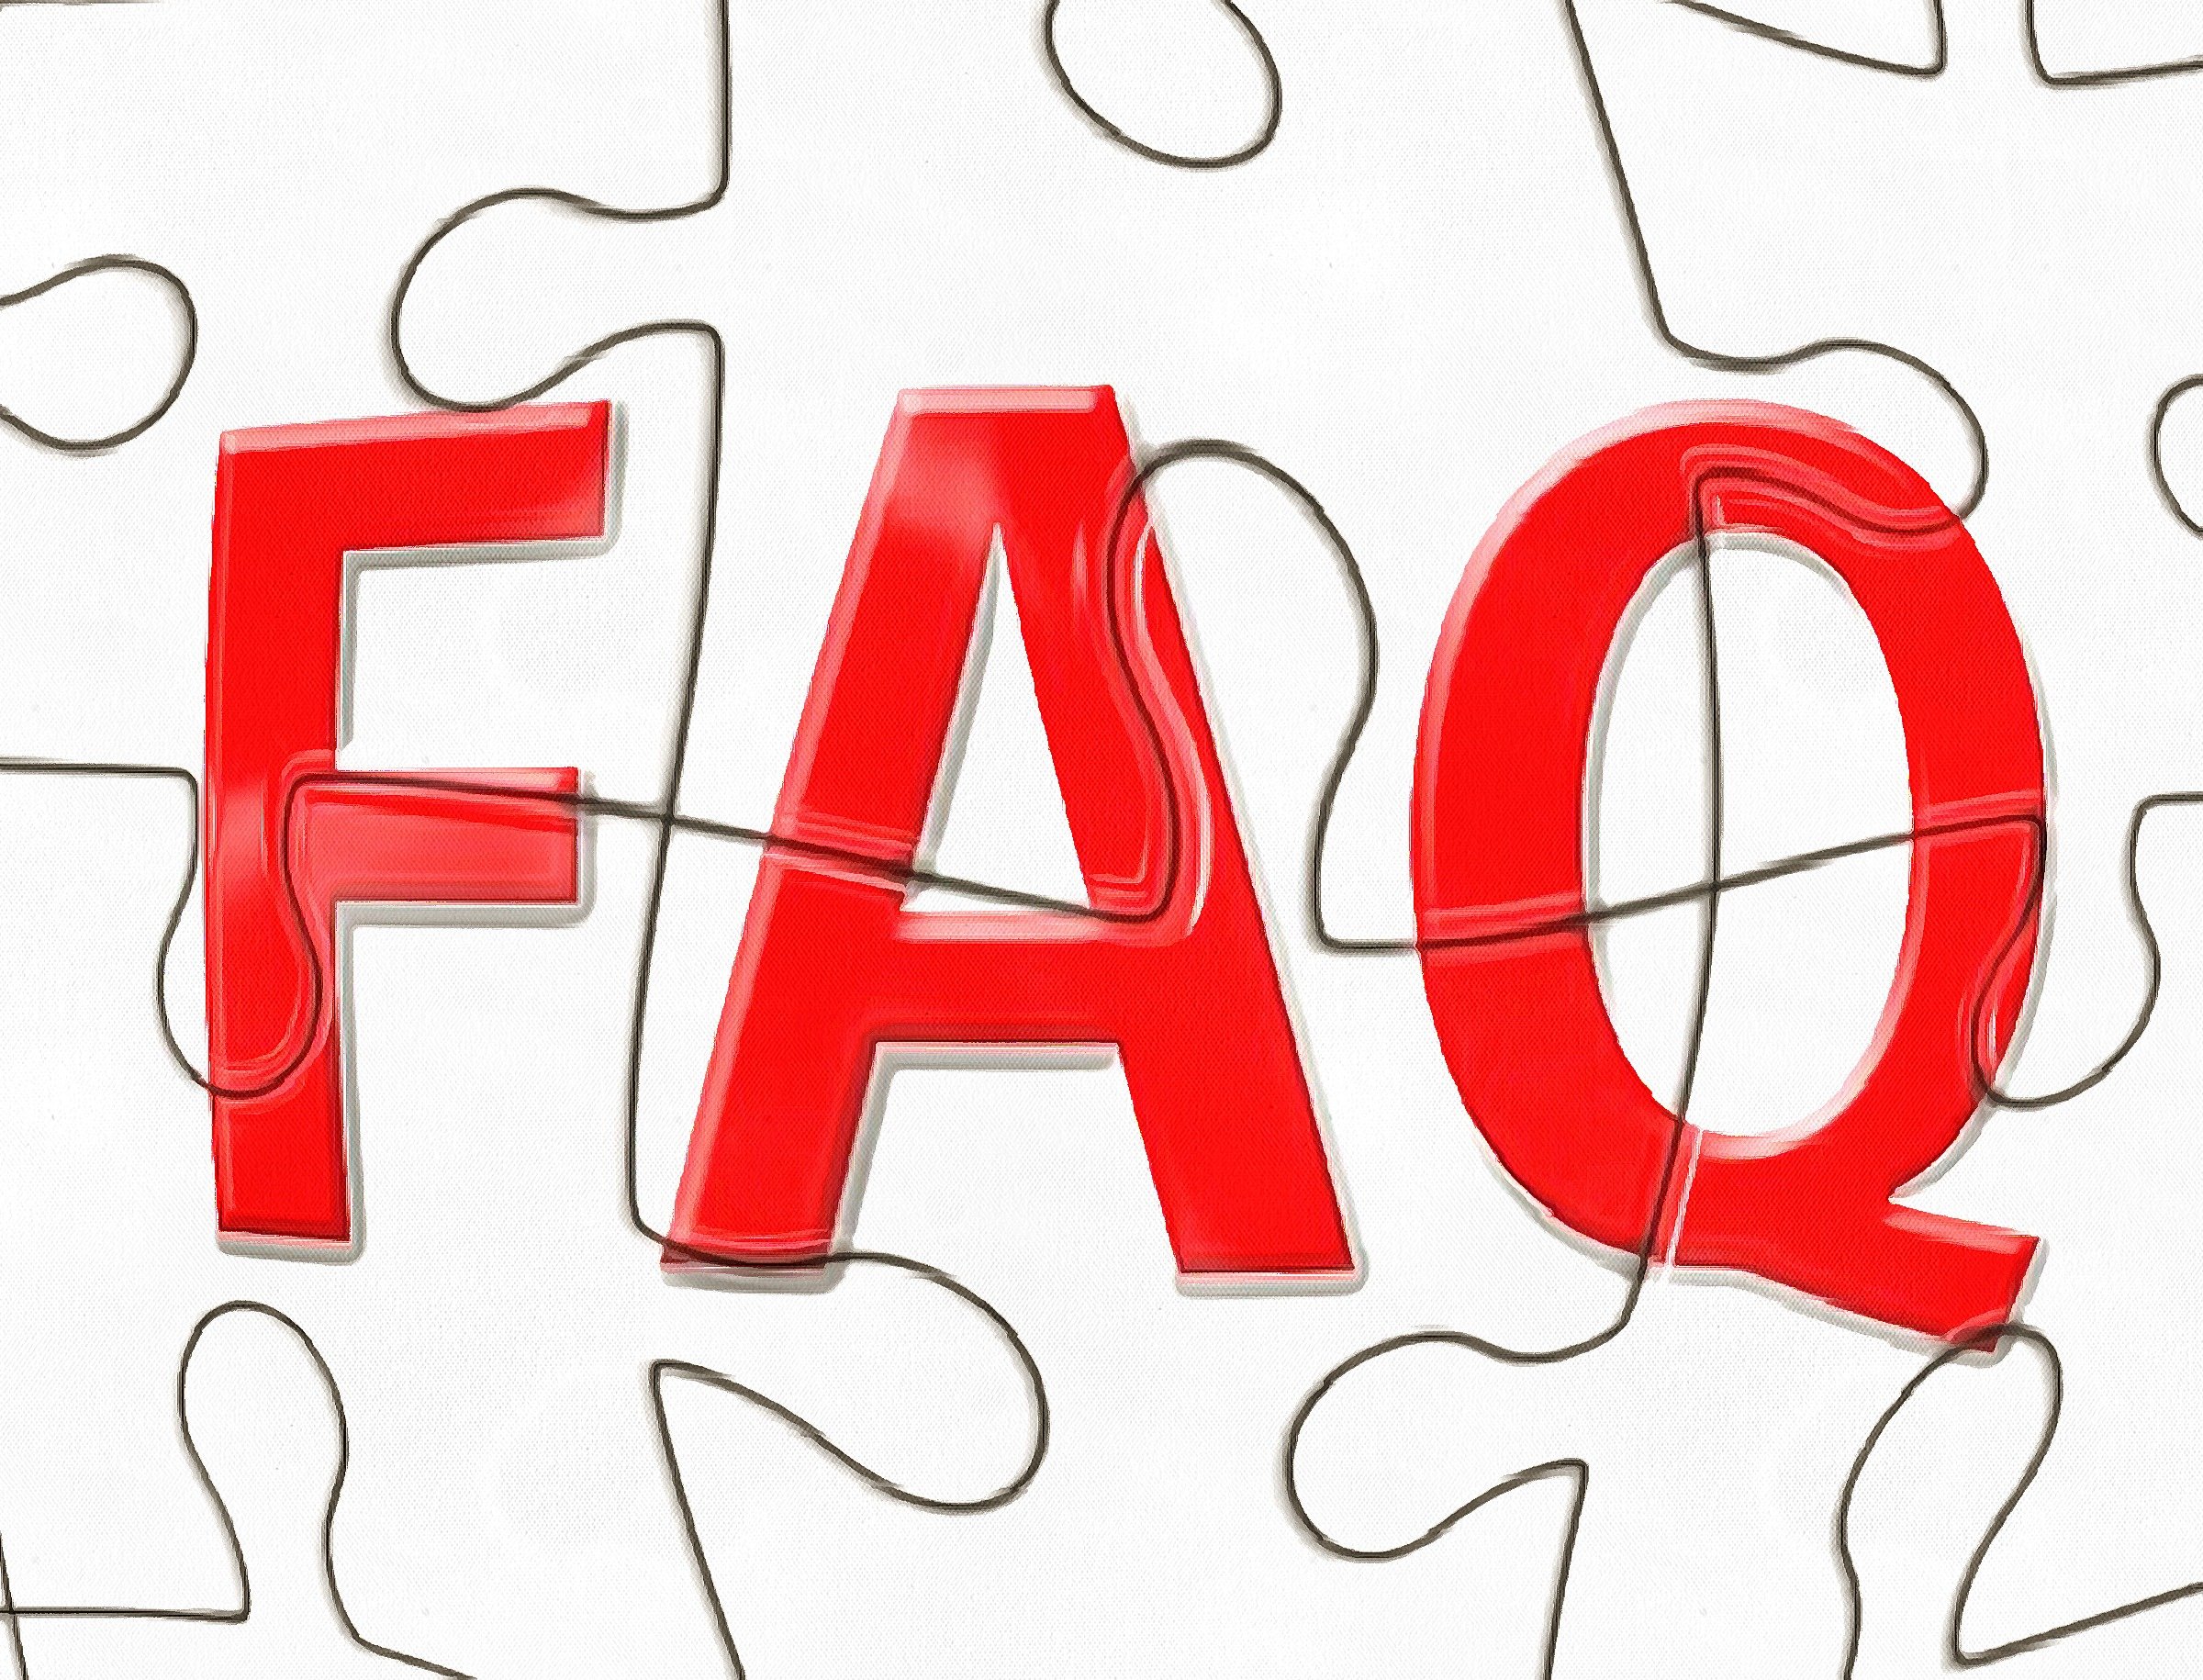 FAQ - STOCK FREE IMAGES. Frequently Asked Questions